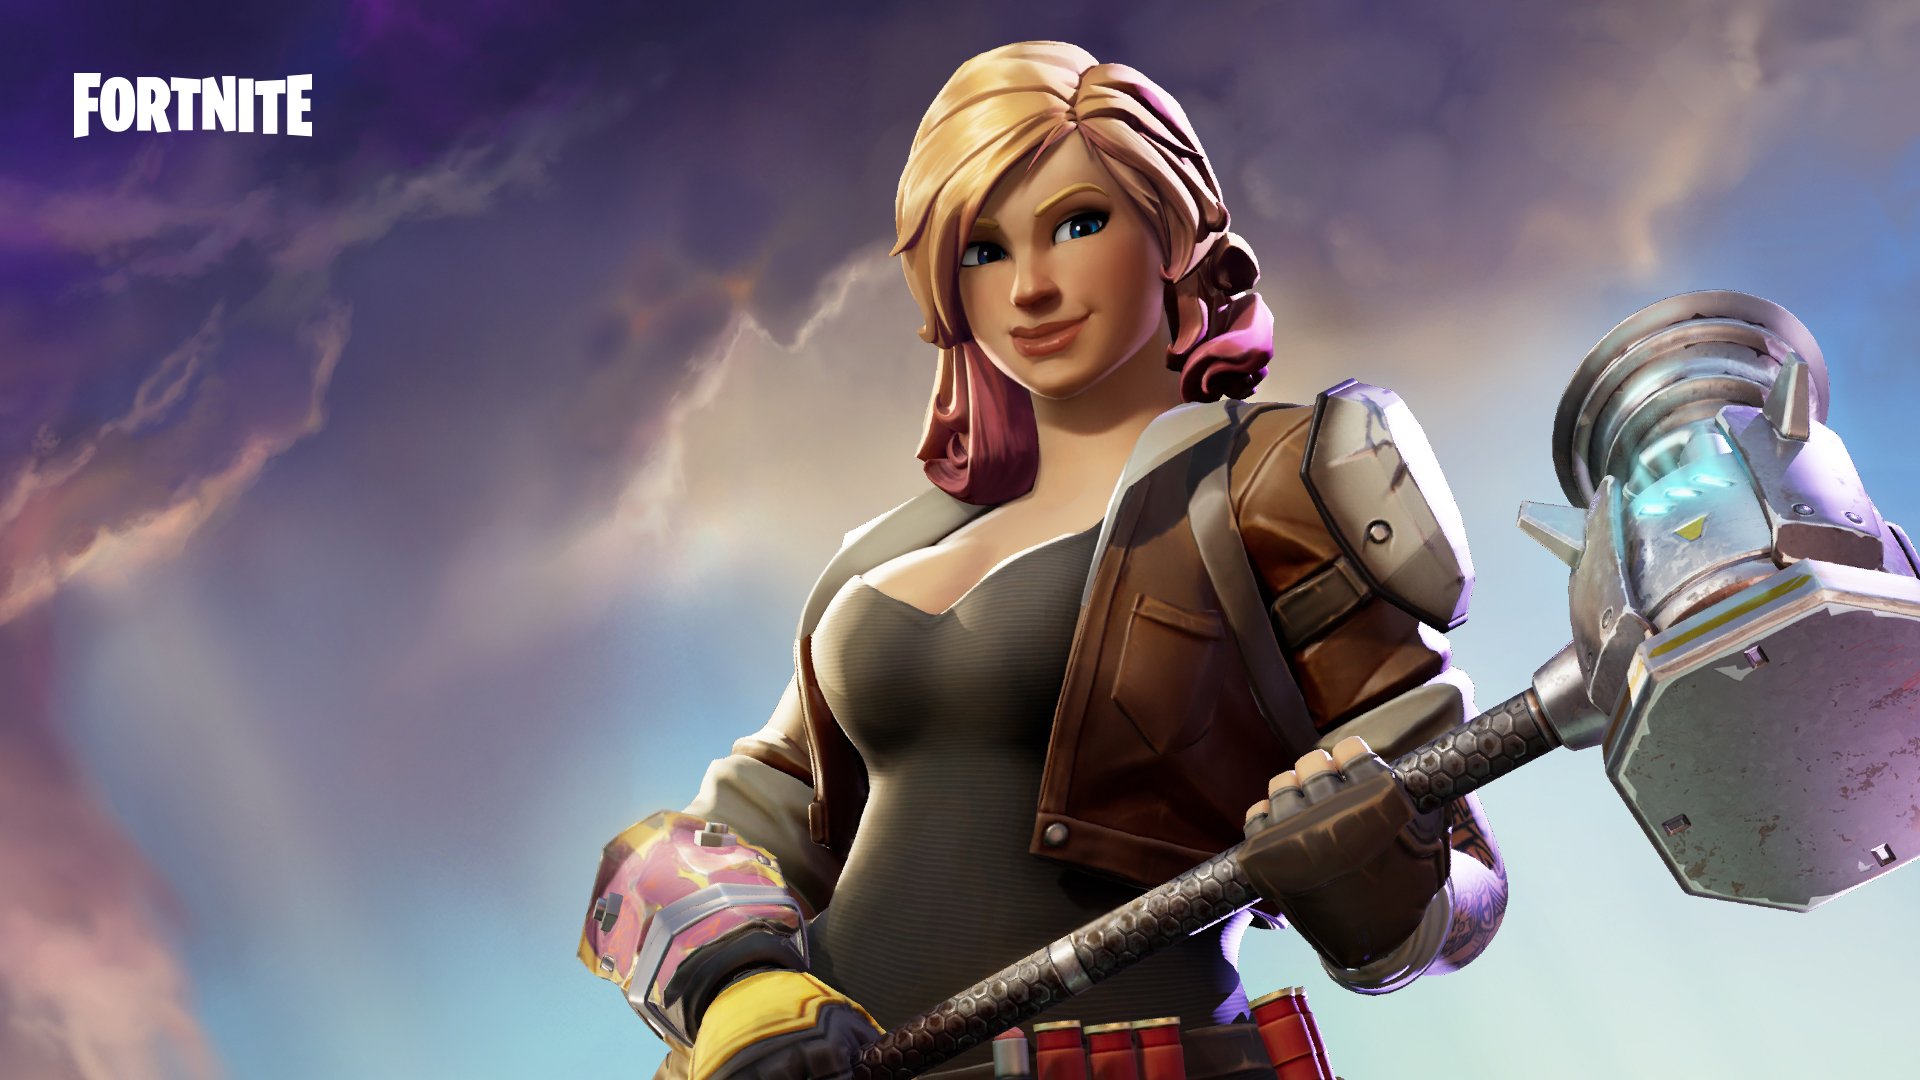 Engaging Women in Fortnite: A Love Story